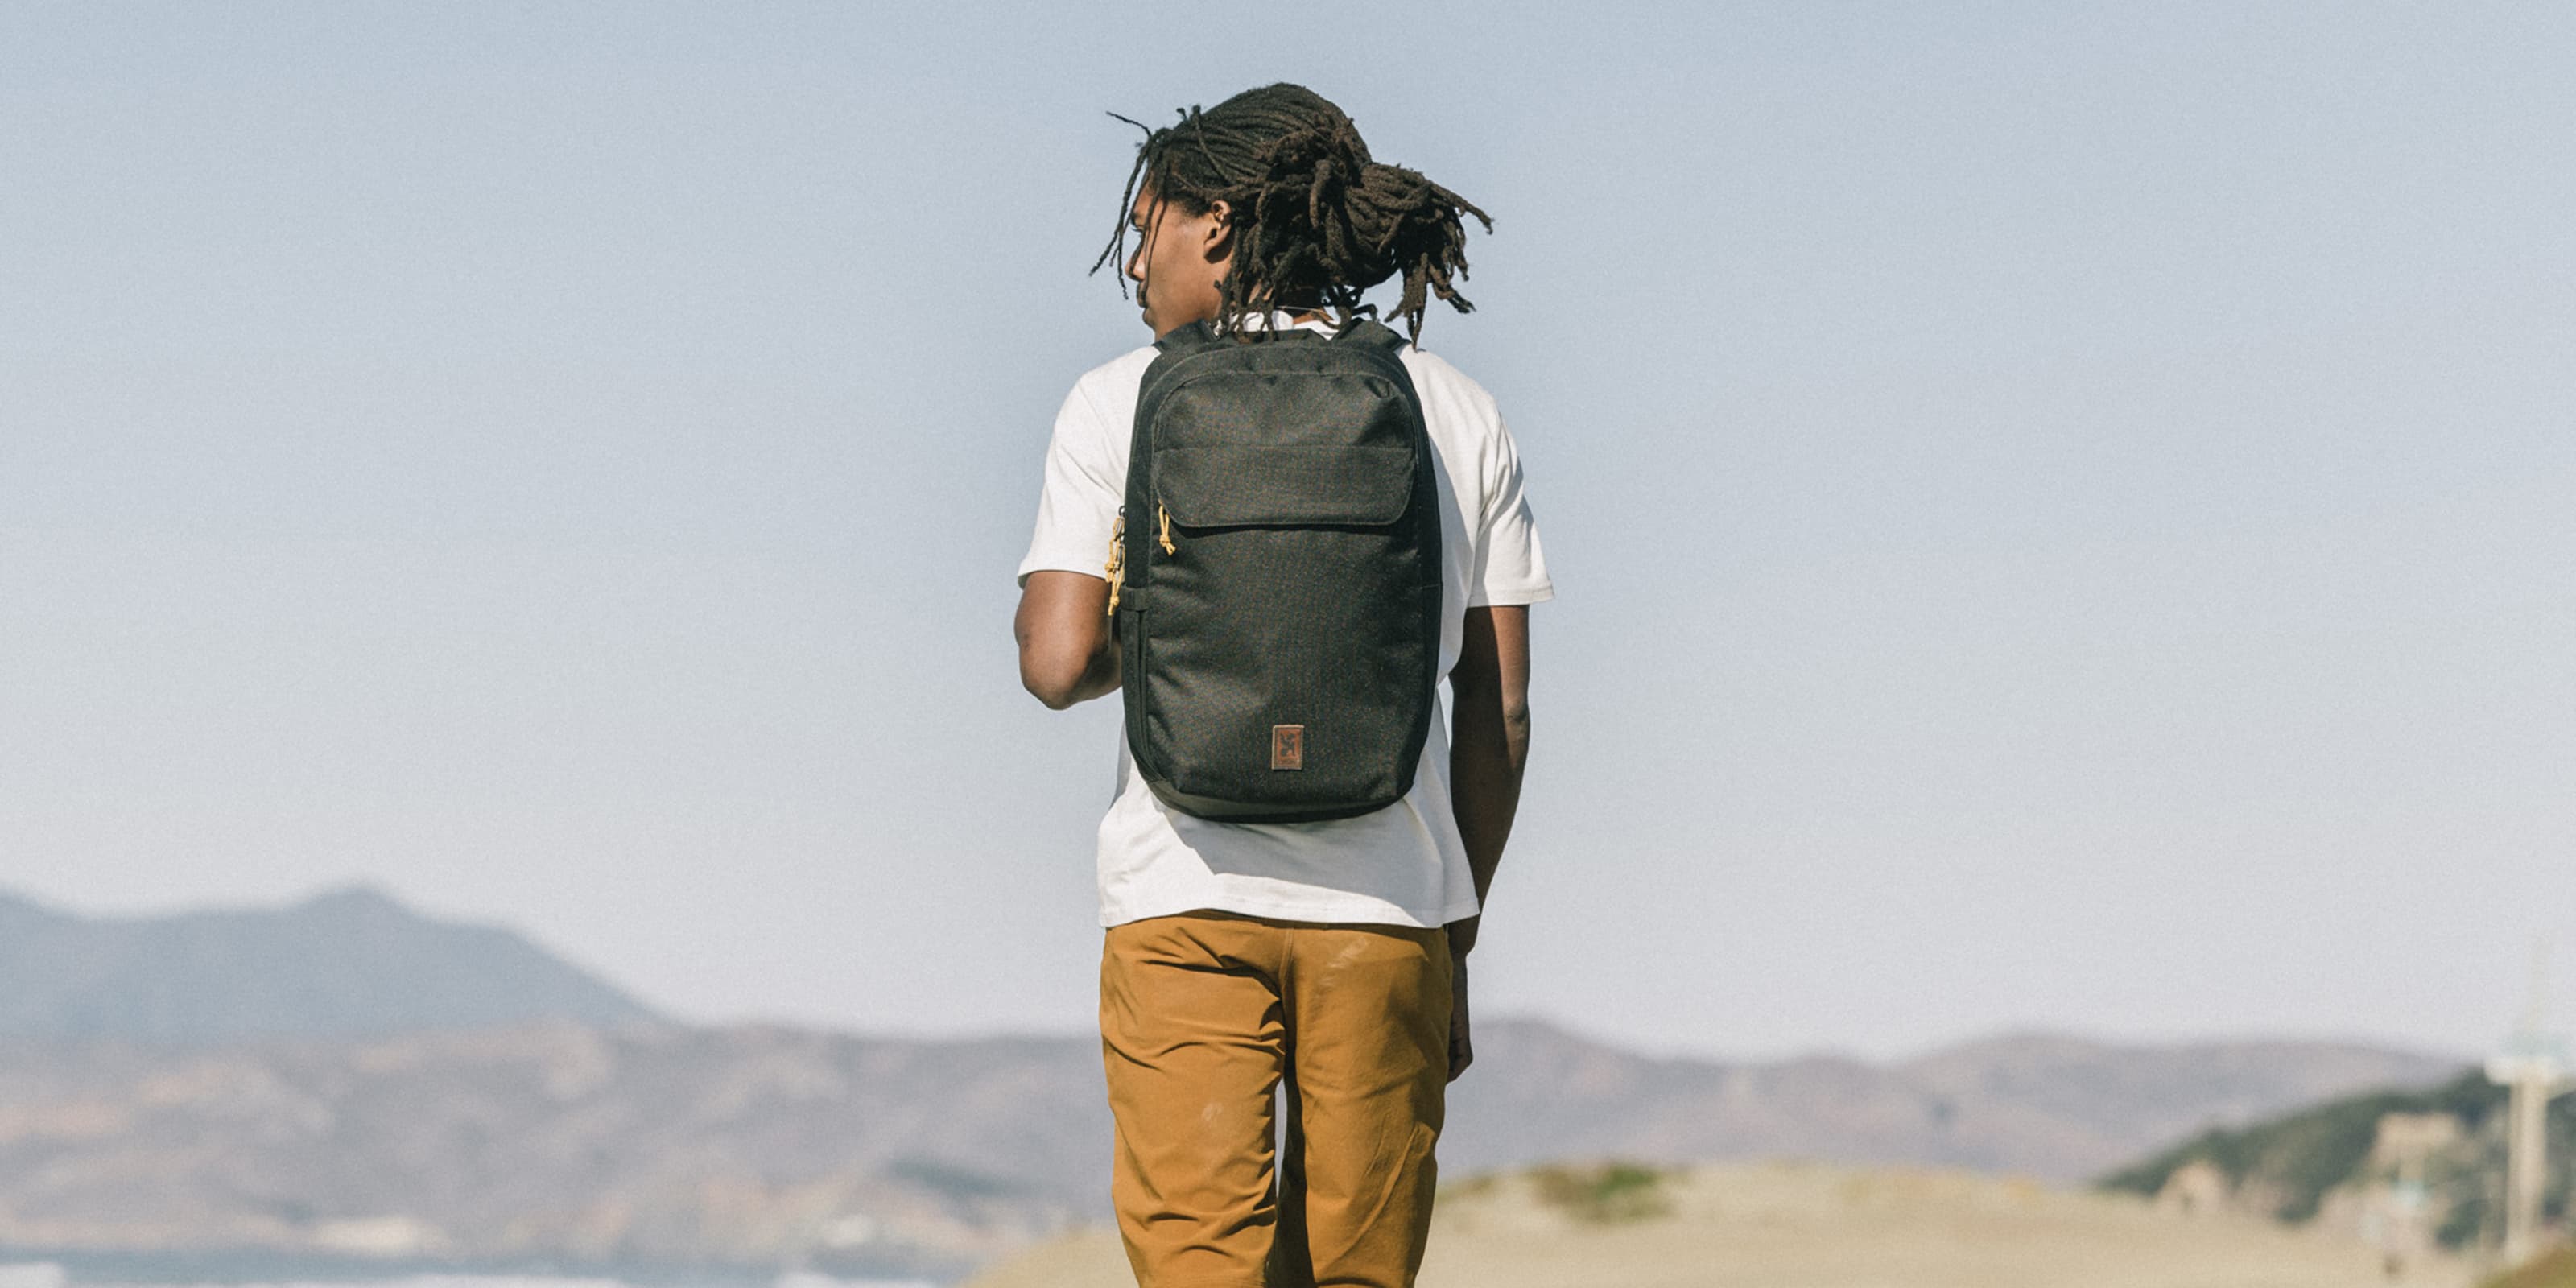 Water-resistant 23L Ruckas Backpack worn by a person walking